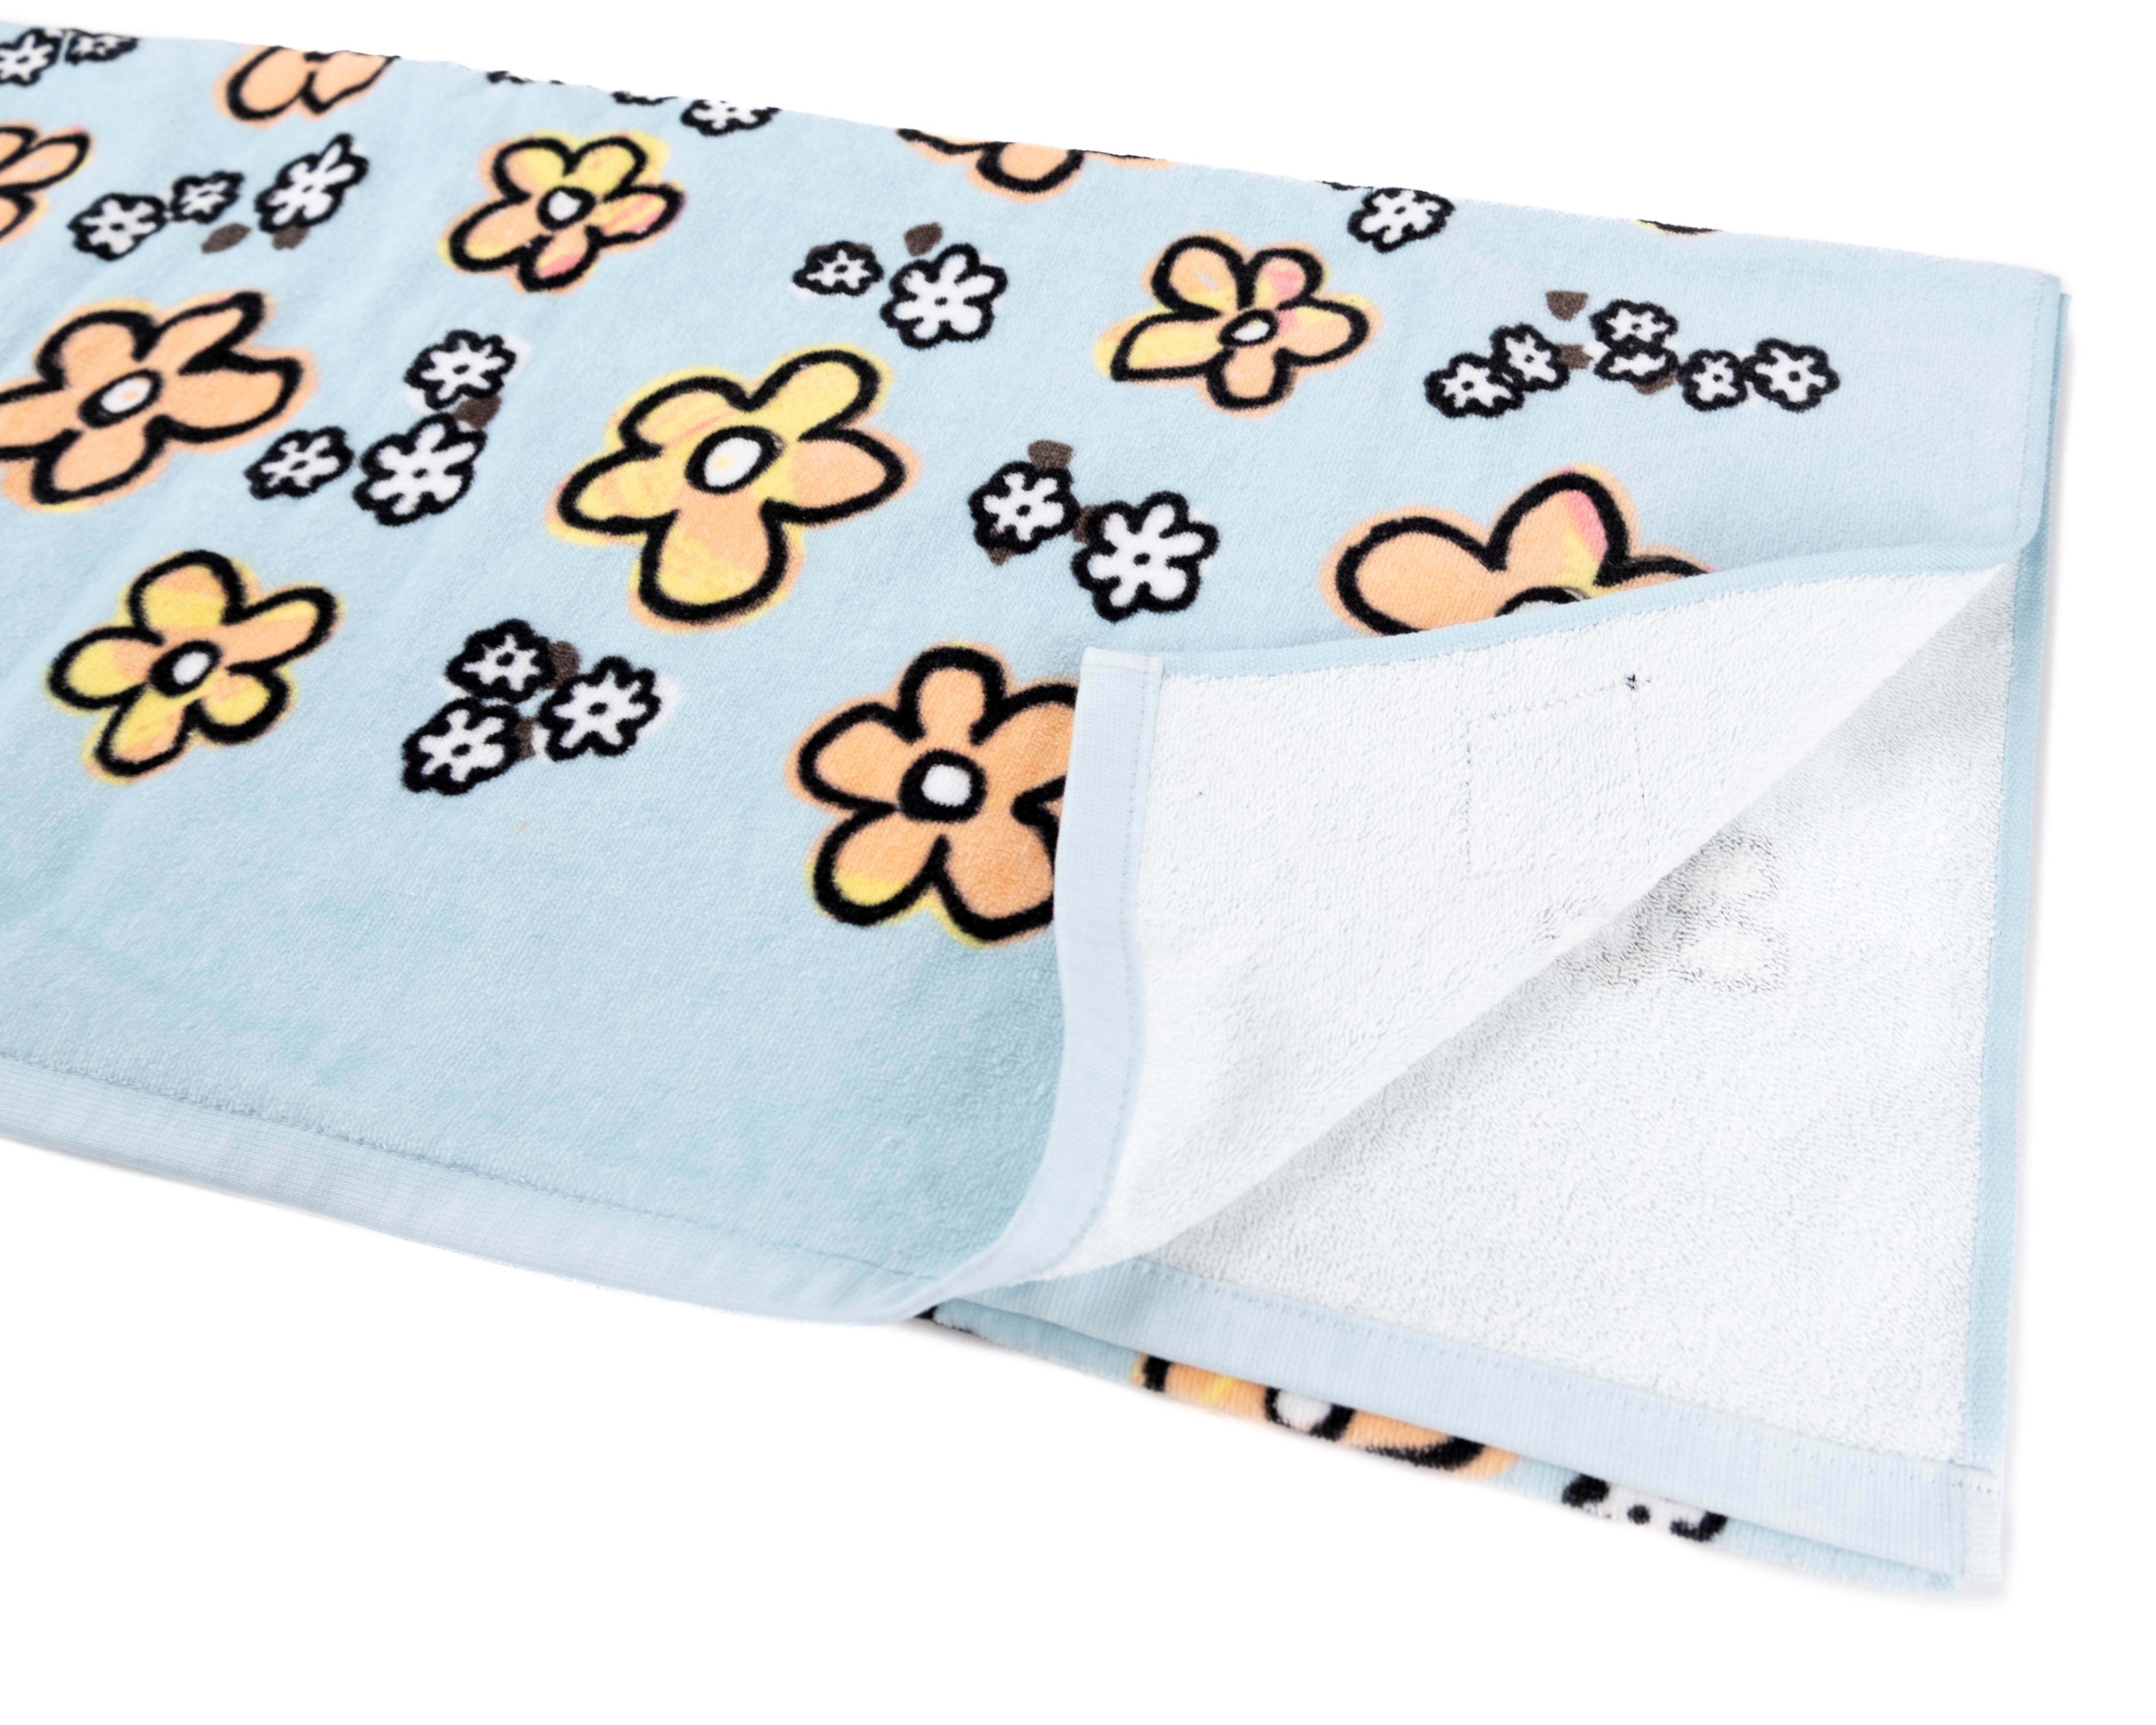 Glaboe Script Lucy Printed Towel - Stormy